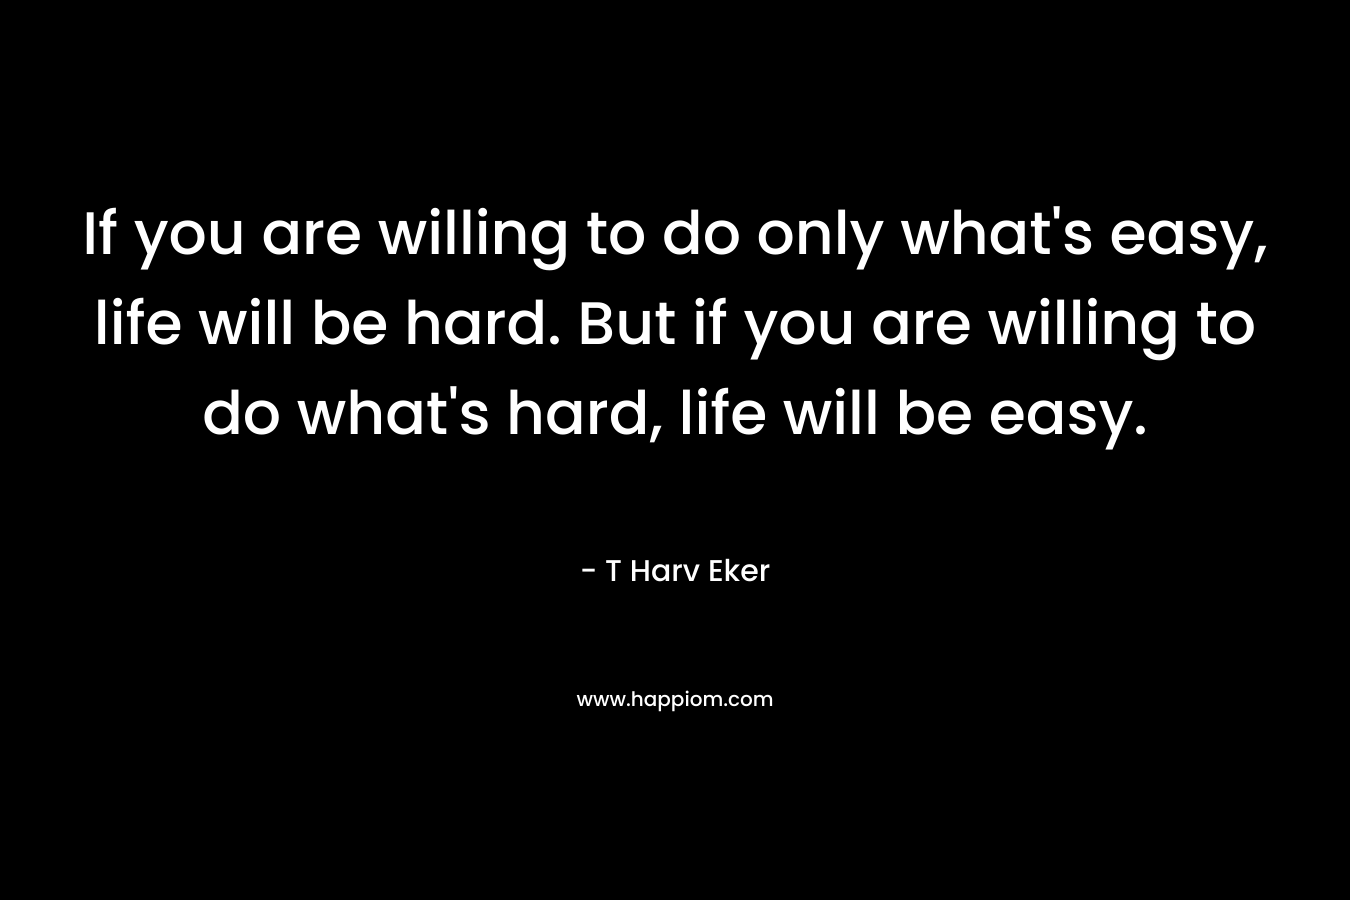 If you are willing to do only what's easy, life will be hard. But if you are willing to do what's hard, life will be easy.